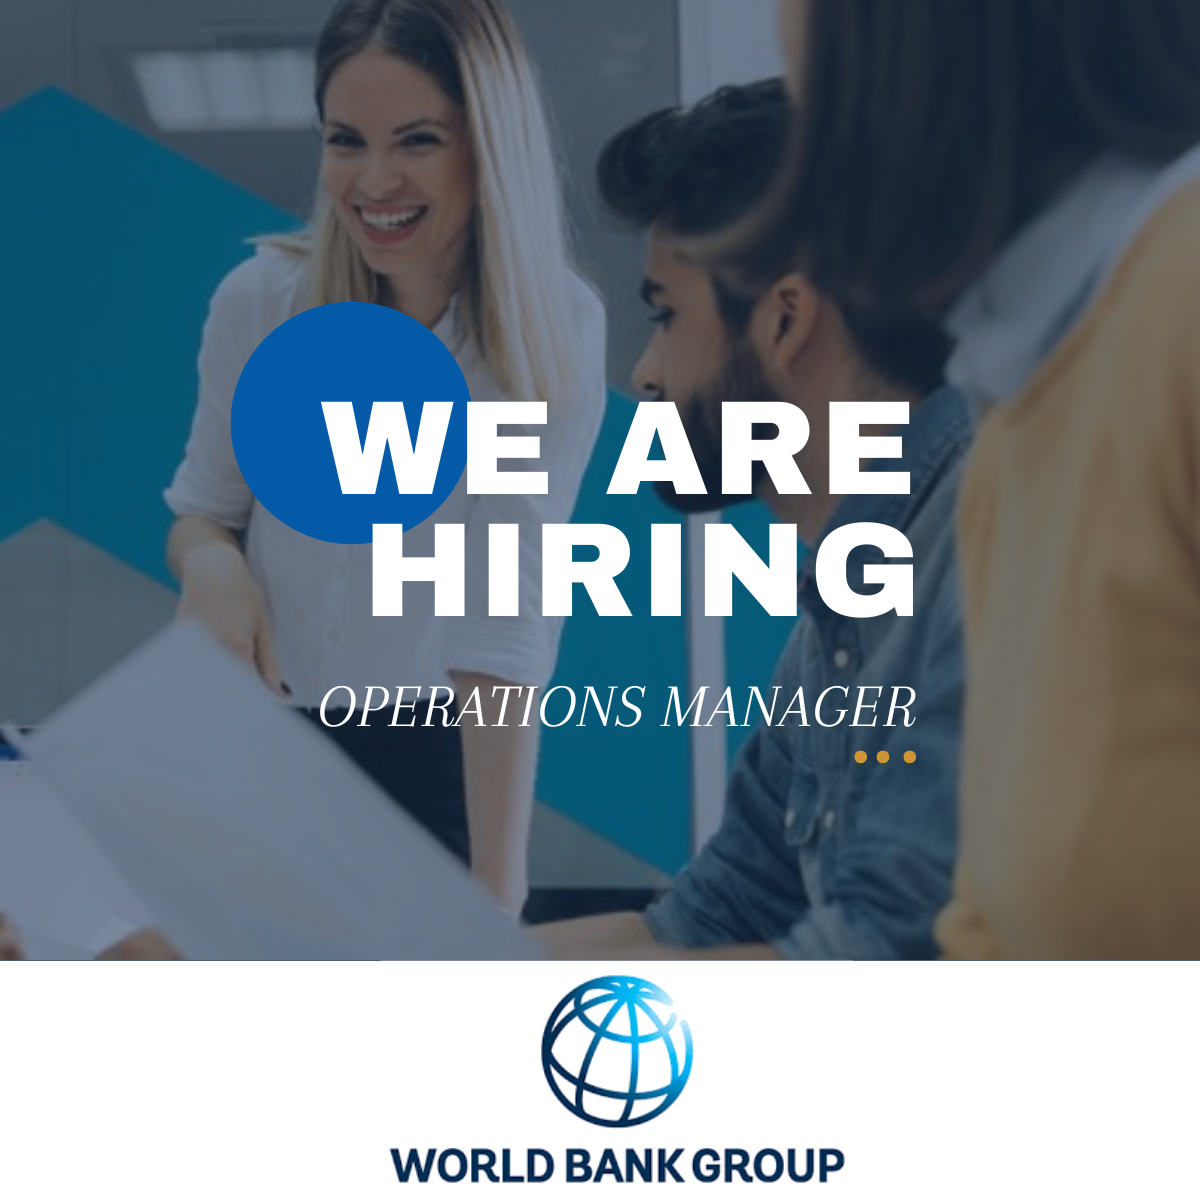 Don't miss out on the chance to become an Operations Manager at the prestigious World Bank. Apply now and unlock a world of professional growth and fulfillment.